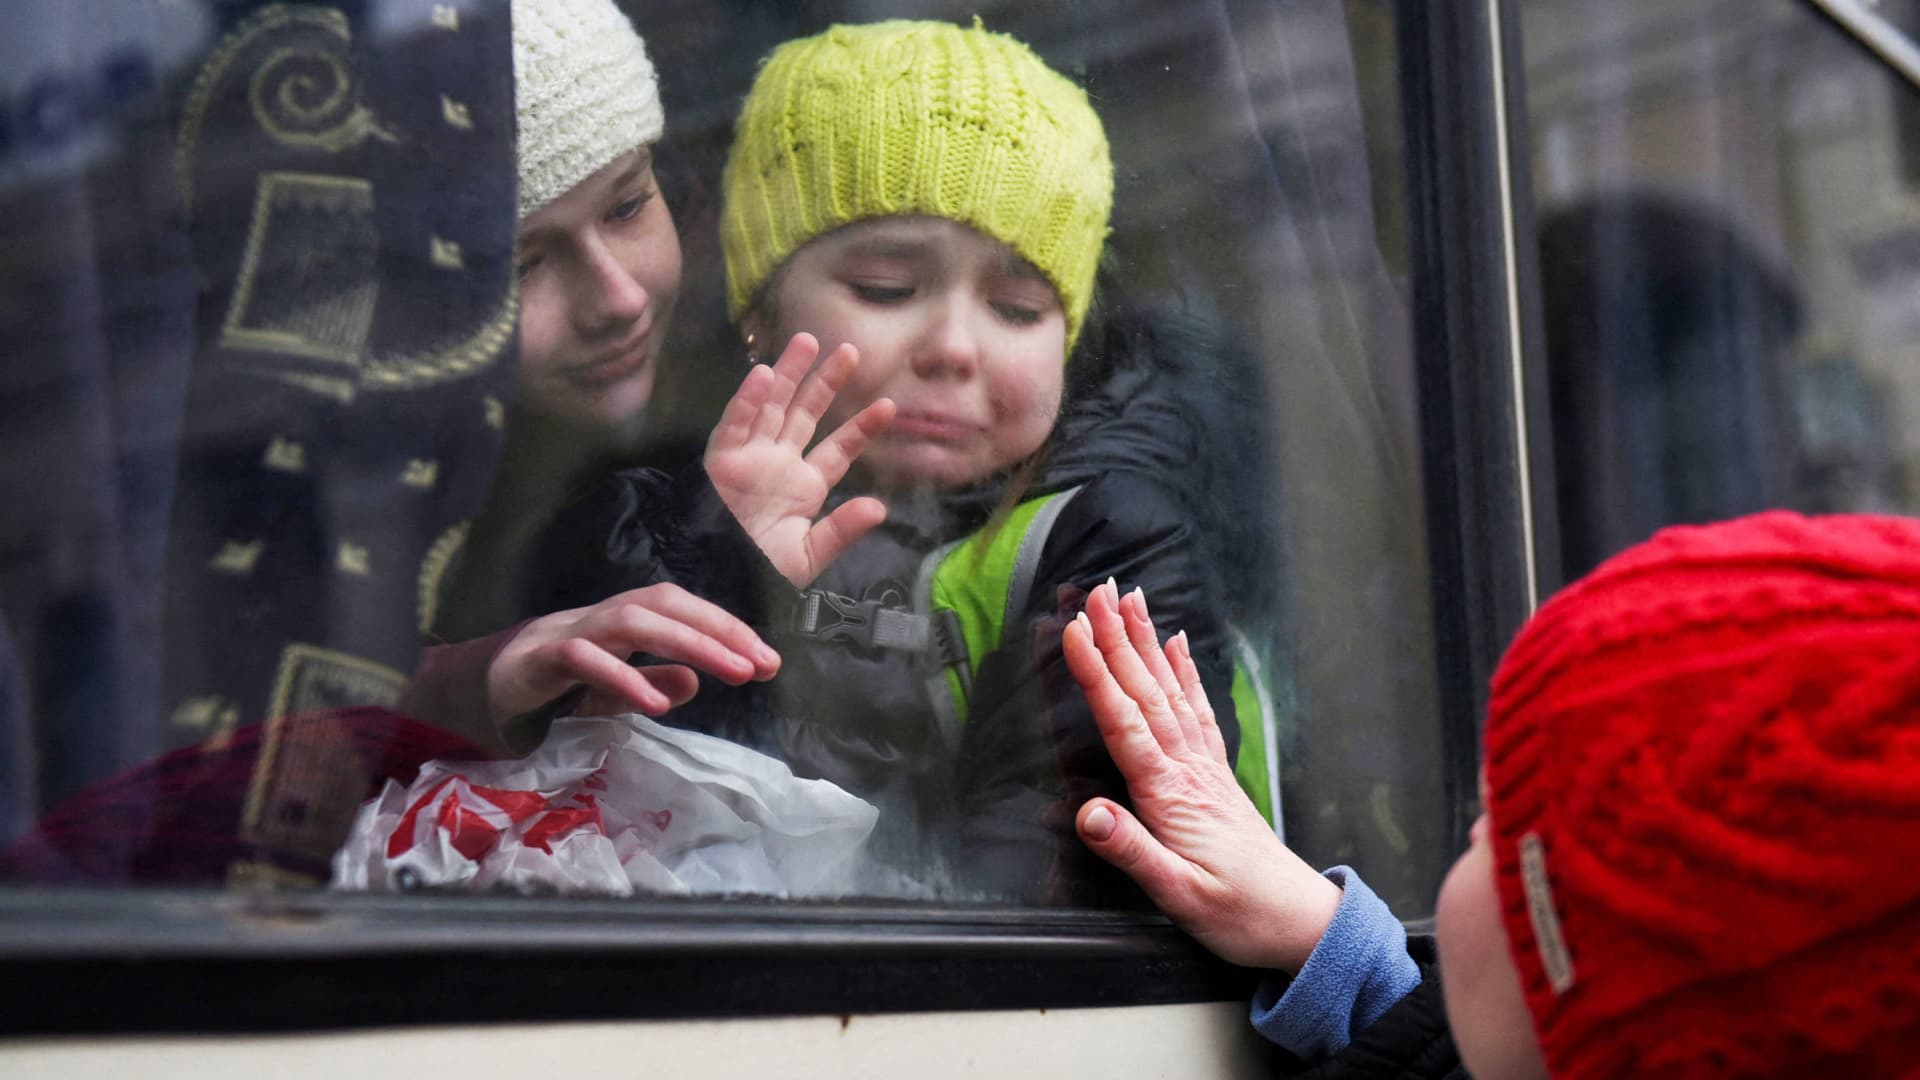 Alexandra, 12, holds her sister Esyea, 6, who cries as she waves at her mother Irina, while members of the Jewish community of Odessa board a bus to flee Russia's invasion of Ukraine, in Odessa, Ukraine, March 7, 2022.